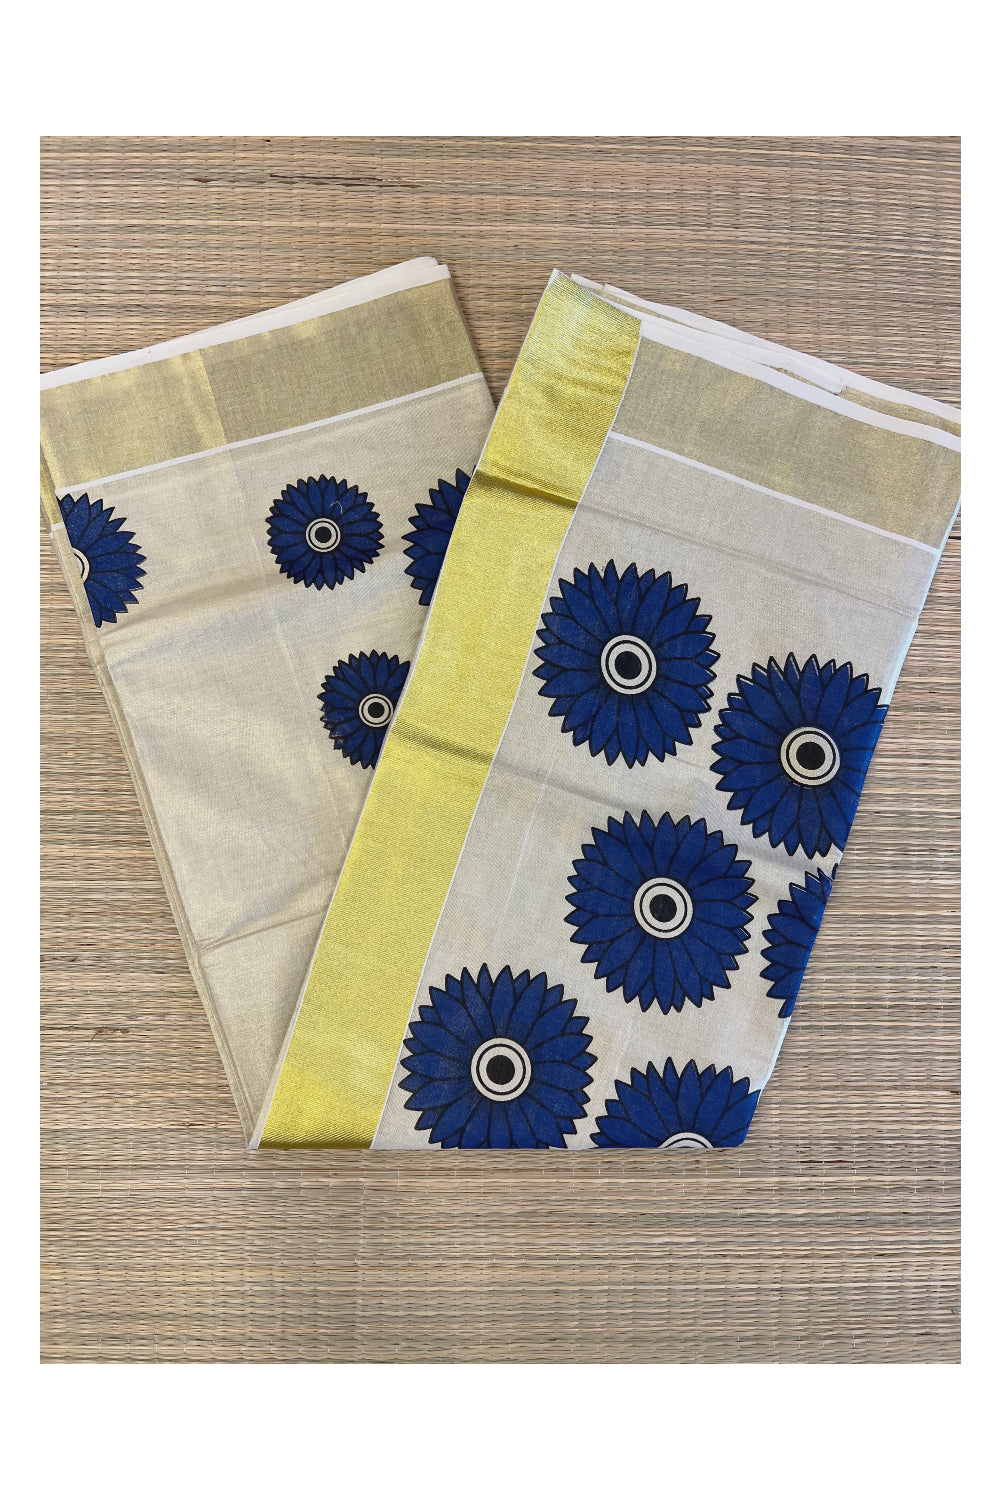 Southloom Exclusive Tissue Kasavu Saree With Sunflower Art On Body and Pallu